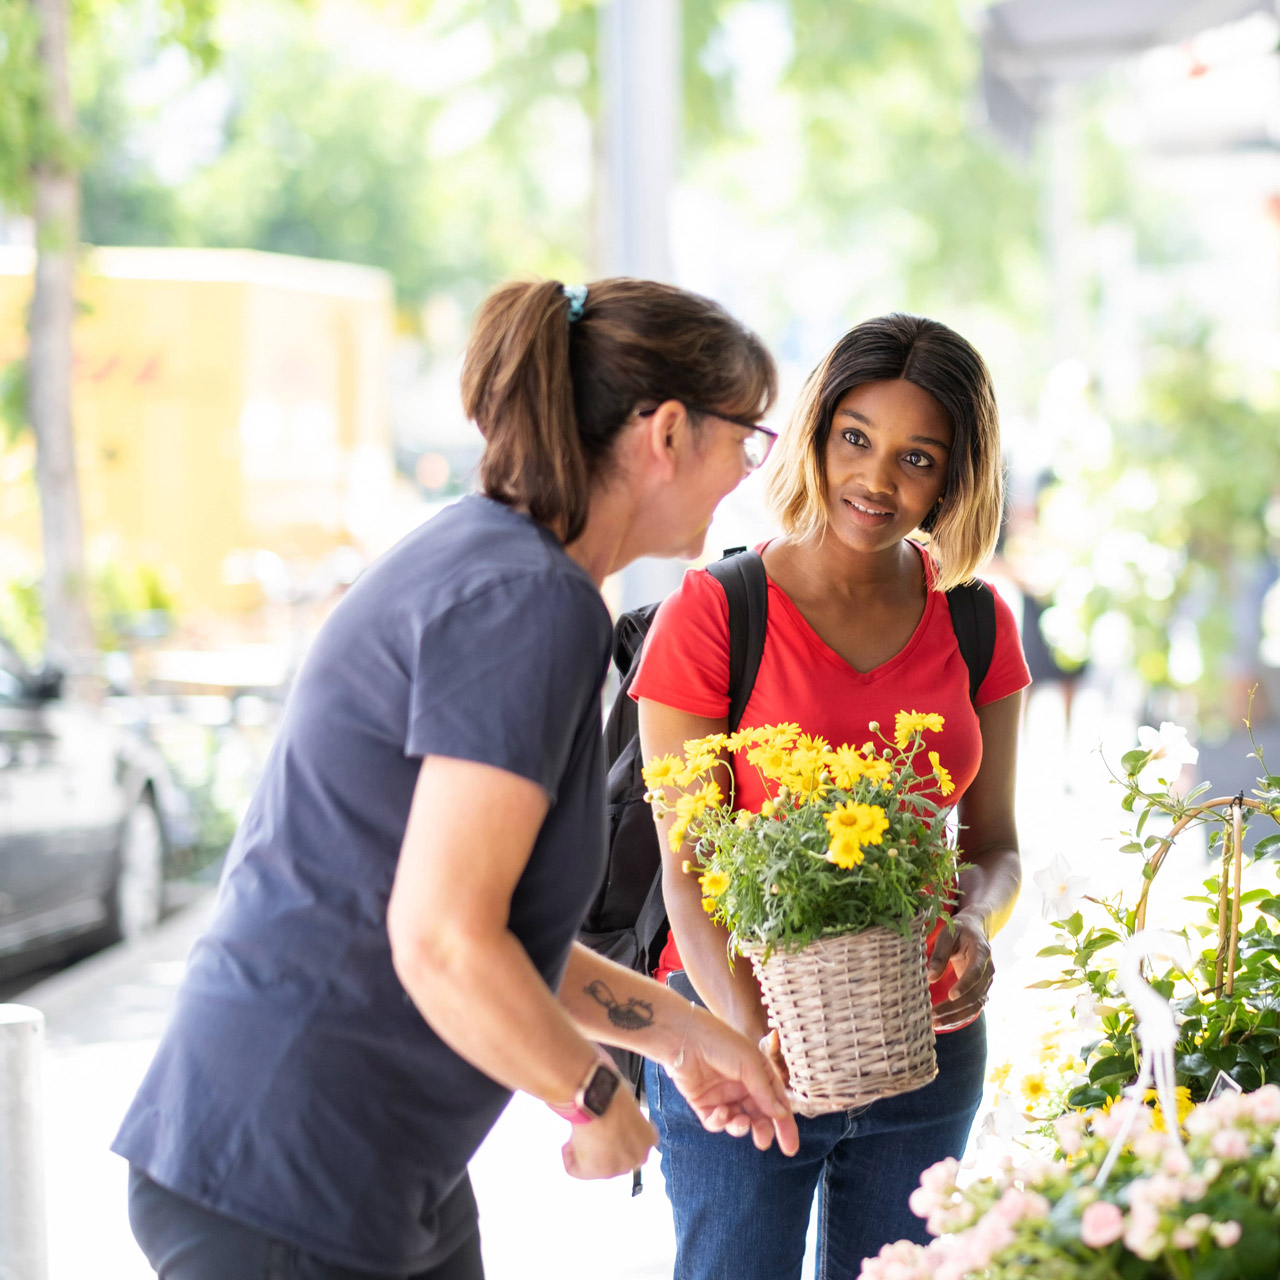 Woman gets advice at Florist Store